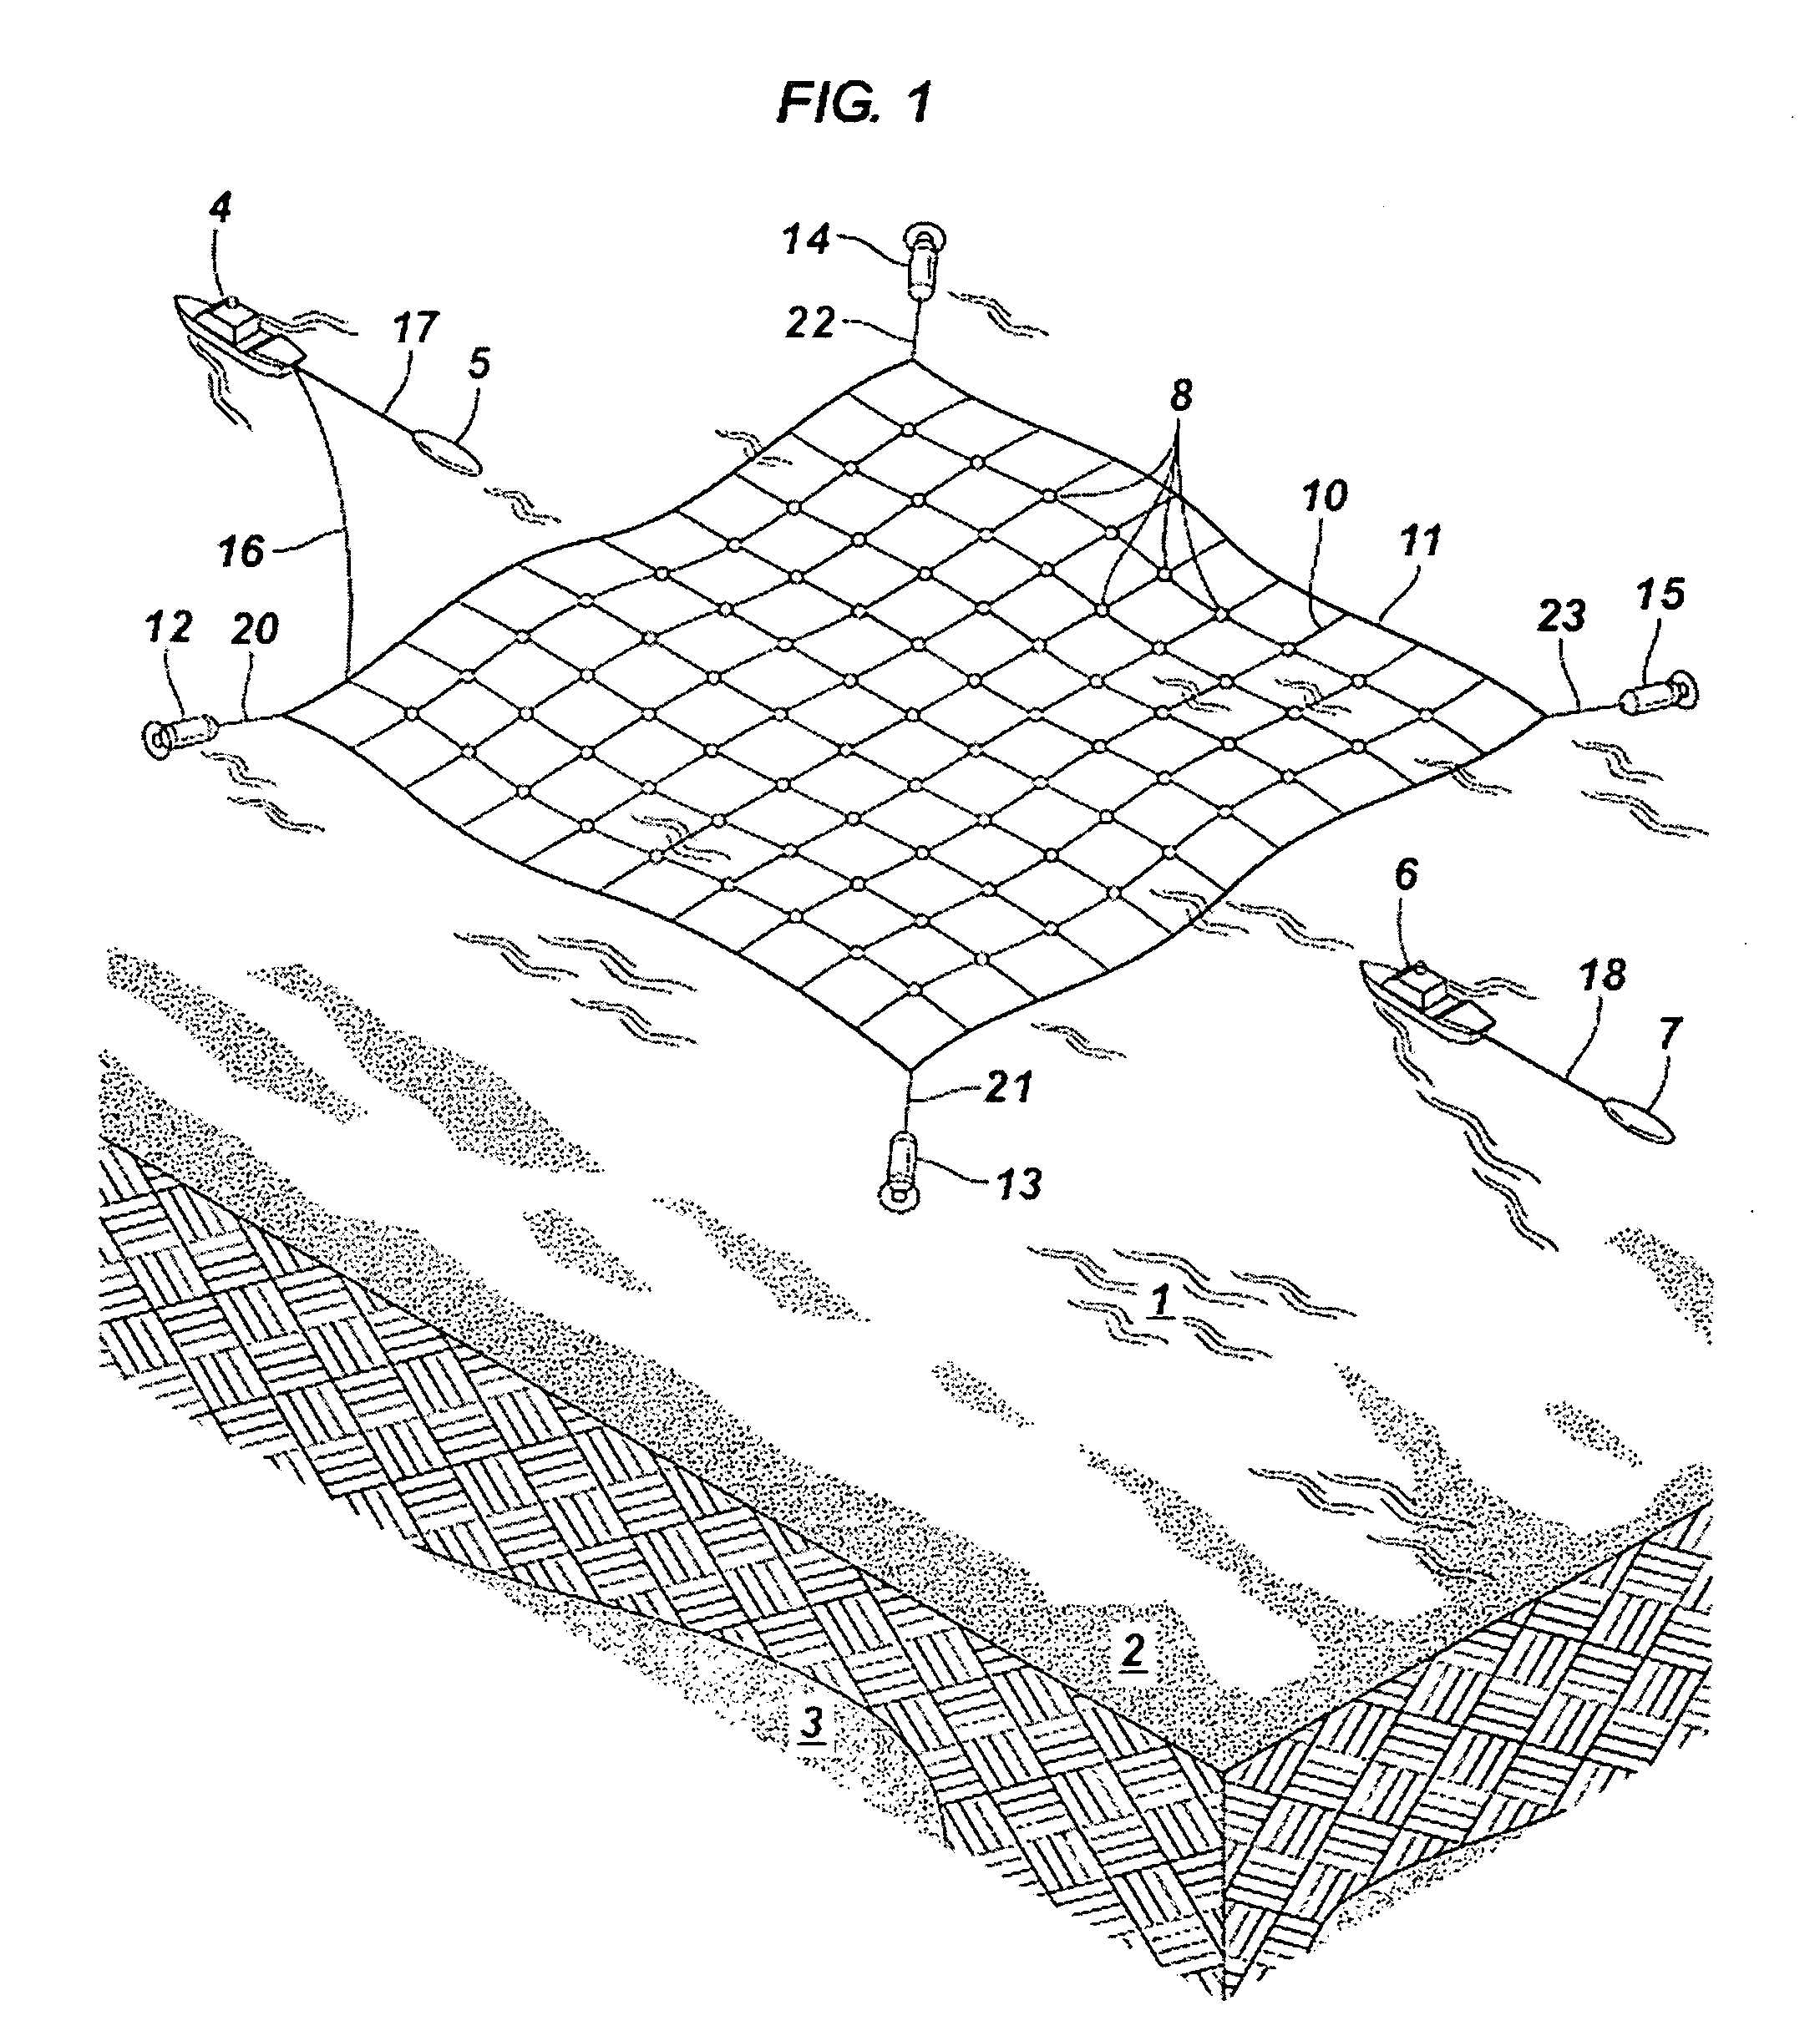 Marine seismic data acquisition systems and methods